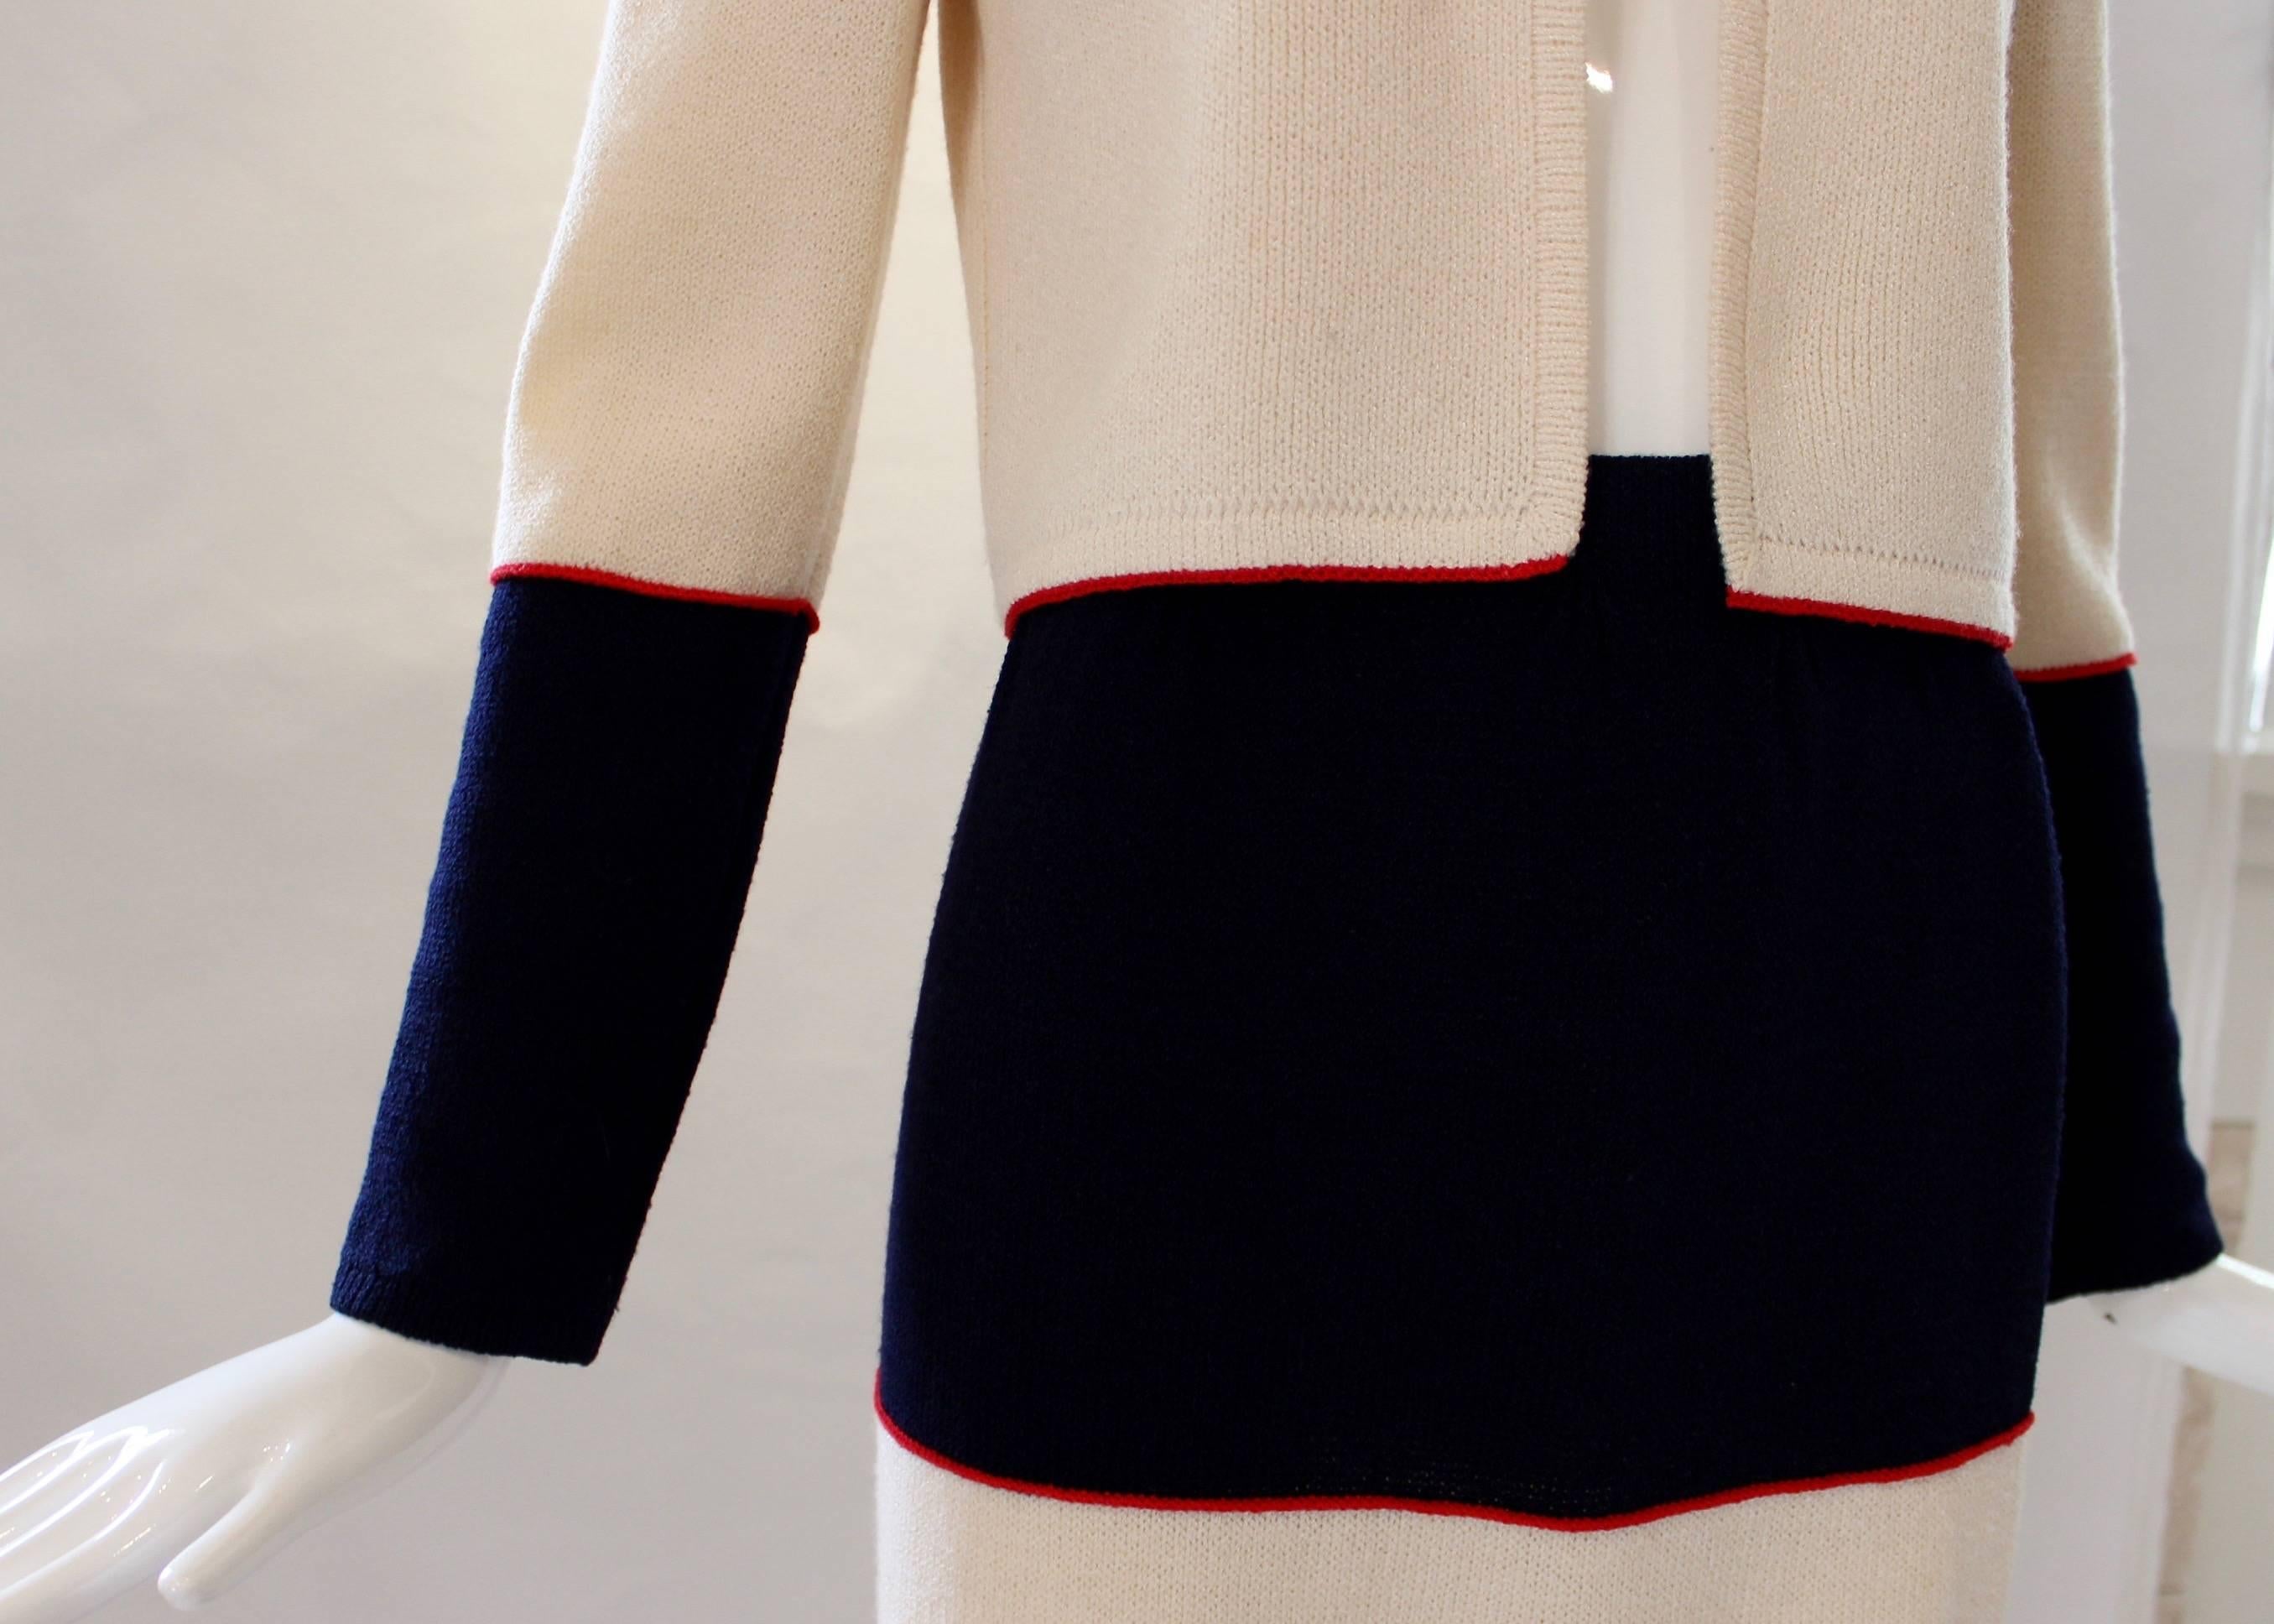 Shades of navy blue, cream and a red trim decorate this vintage two piece set from St. John. An adorable and rare vintage find, the sweater has a clasp at the collar and padded shoulders while the pencil skirt features an elastic waistband and falls